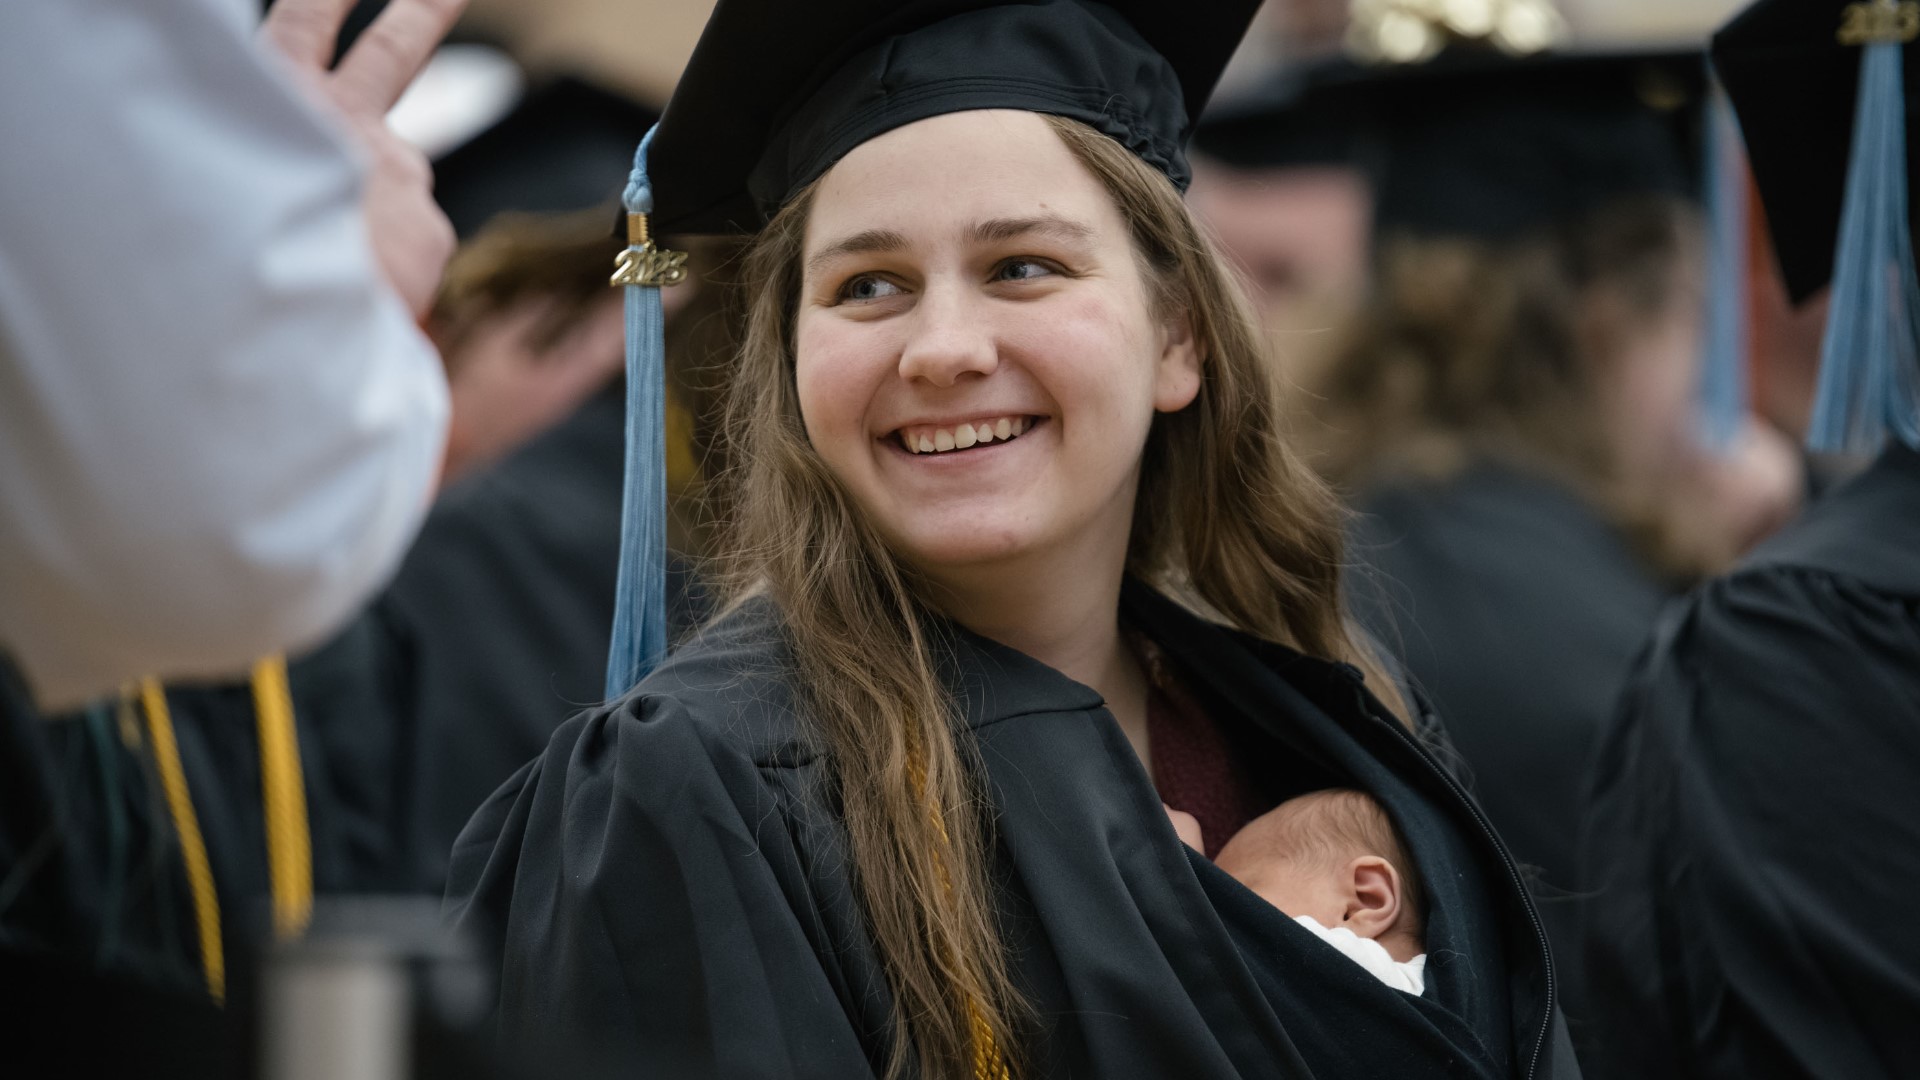 "I’d worked hard for this degree, and I was determined to walk with the rest of my class… so I just brought her to graduation with me,” said Grace Szymchack.